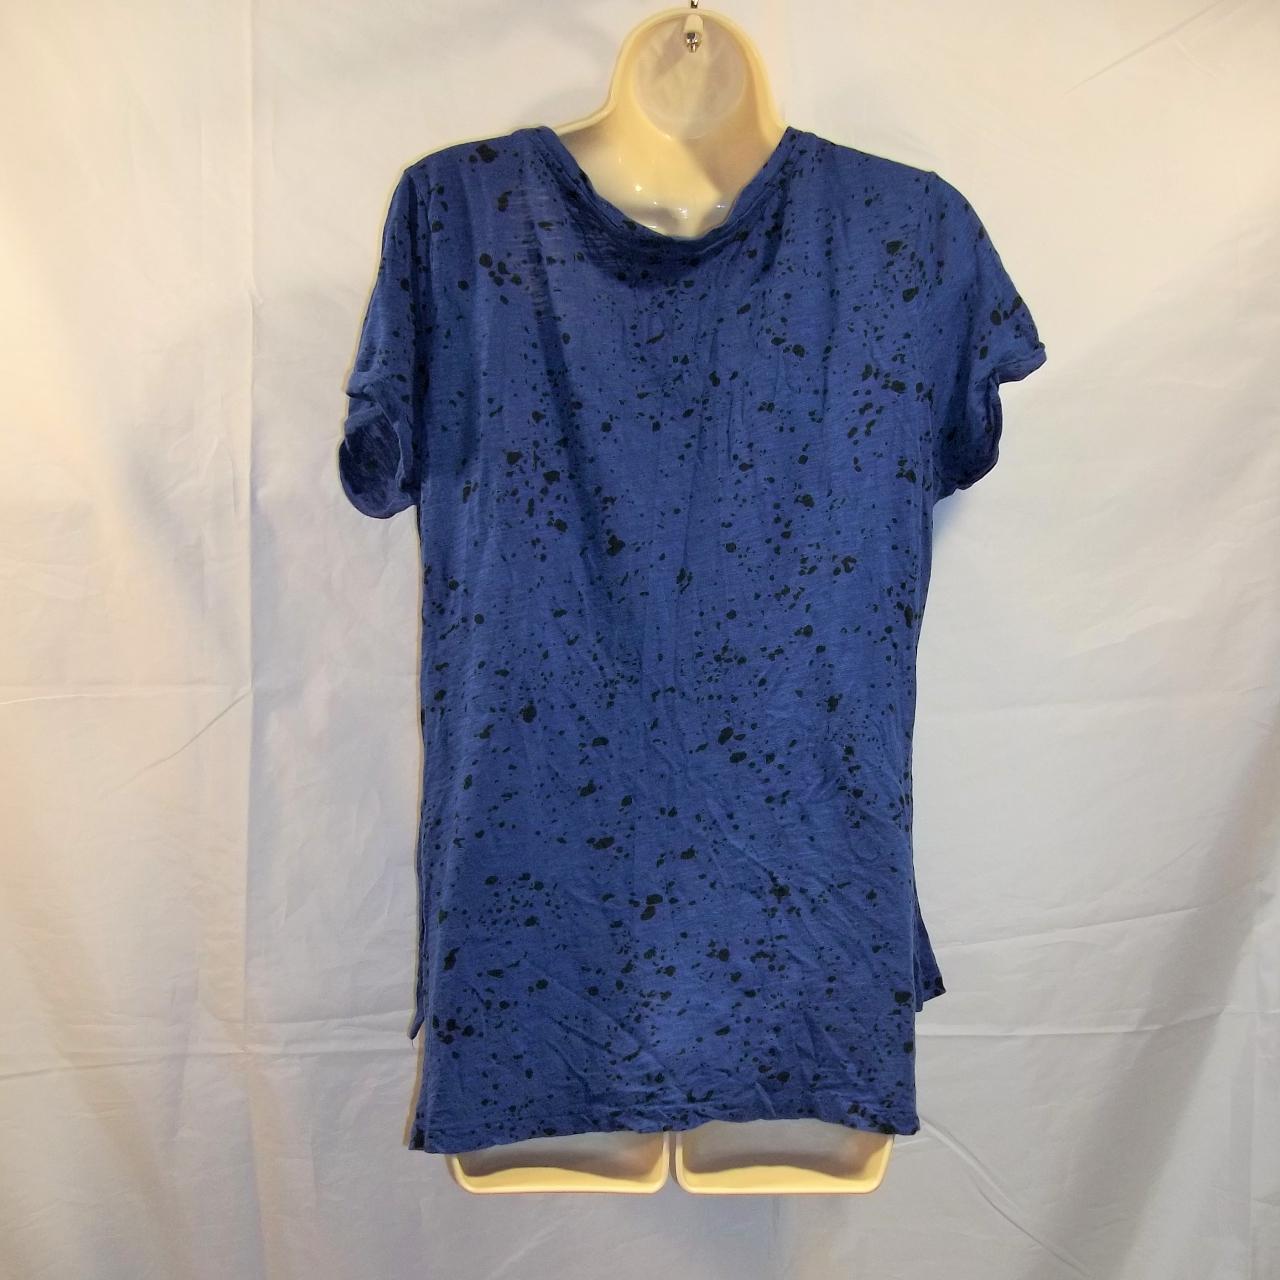 Rock and Republic Women's Blue and Black T-shirt (2)